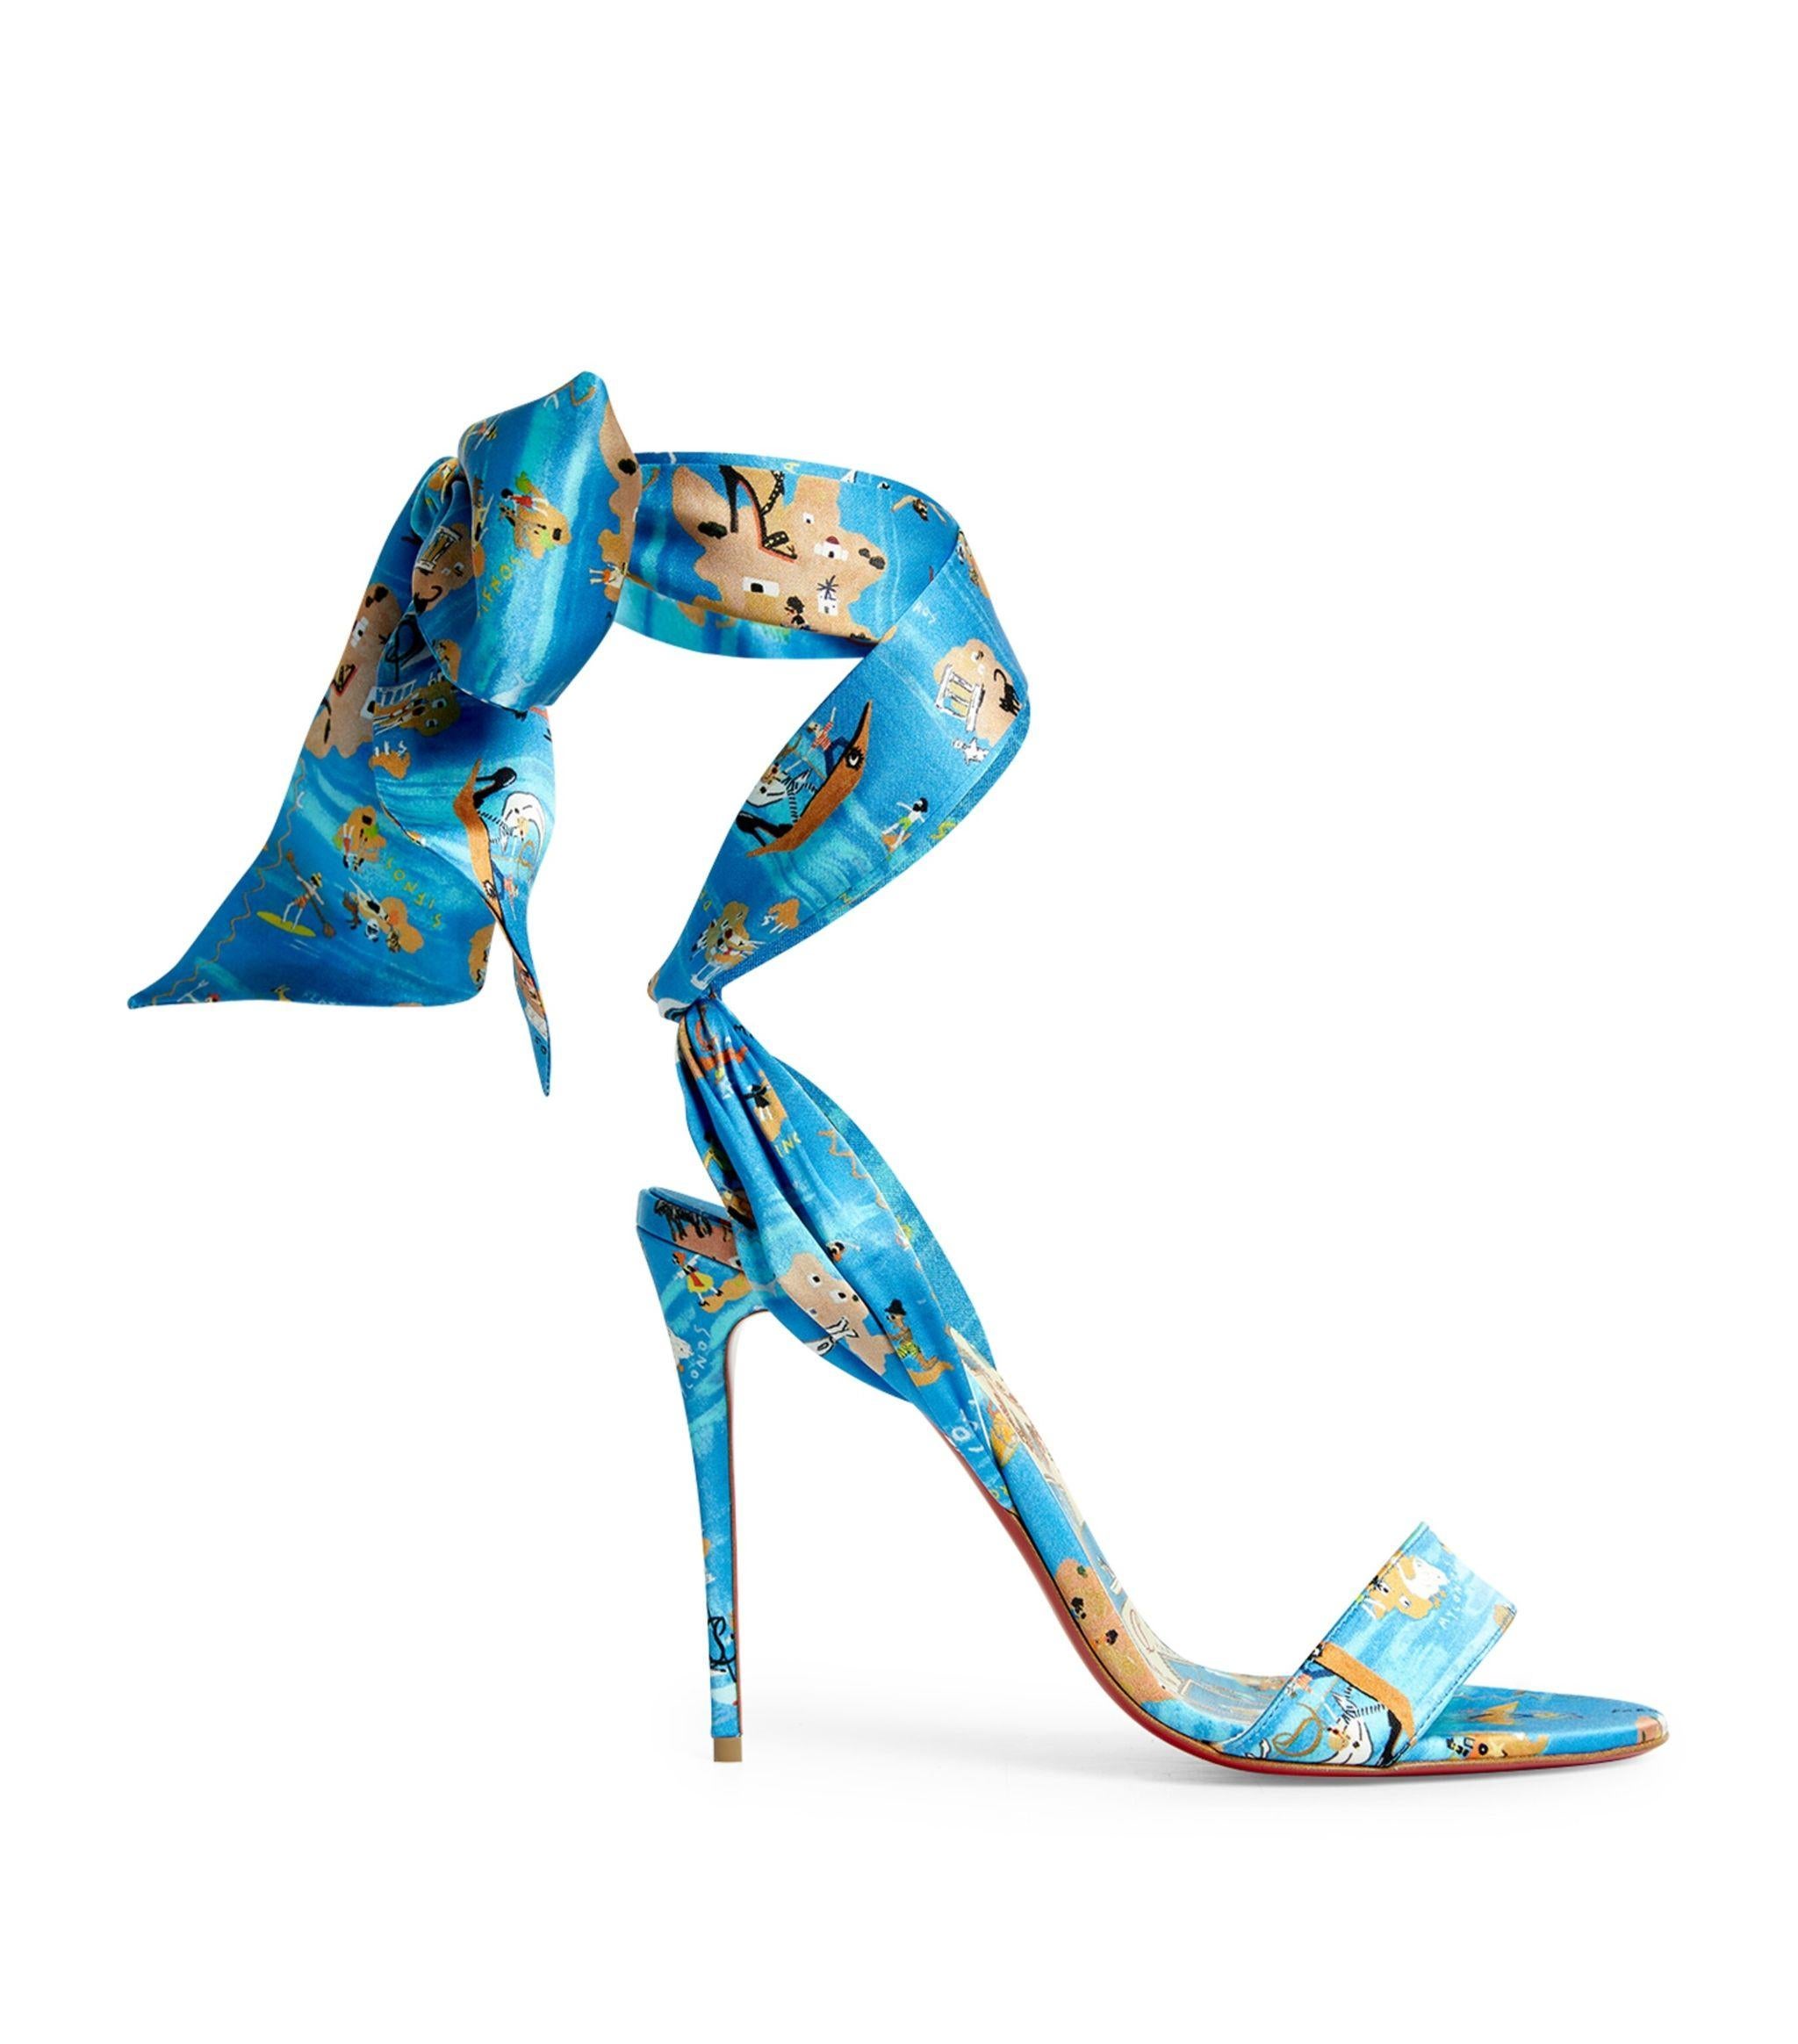 These chic stylish heels are crafted of Loubi Odyssey blue patterned crepe satin, inspired by the Greek islands. These have a 4-inch wrapped sharp stiletto, adjustable ribbon ankle ties and an open toe. New. Never worn. With tags, box and shoe bag.